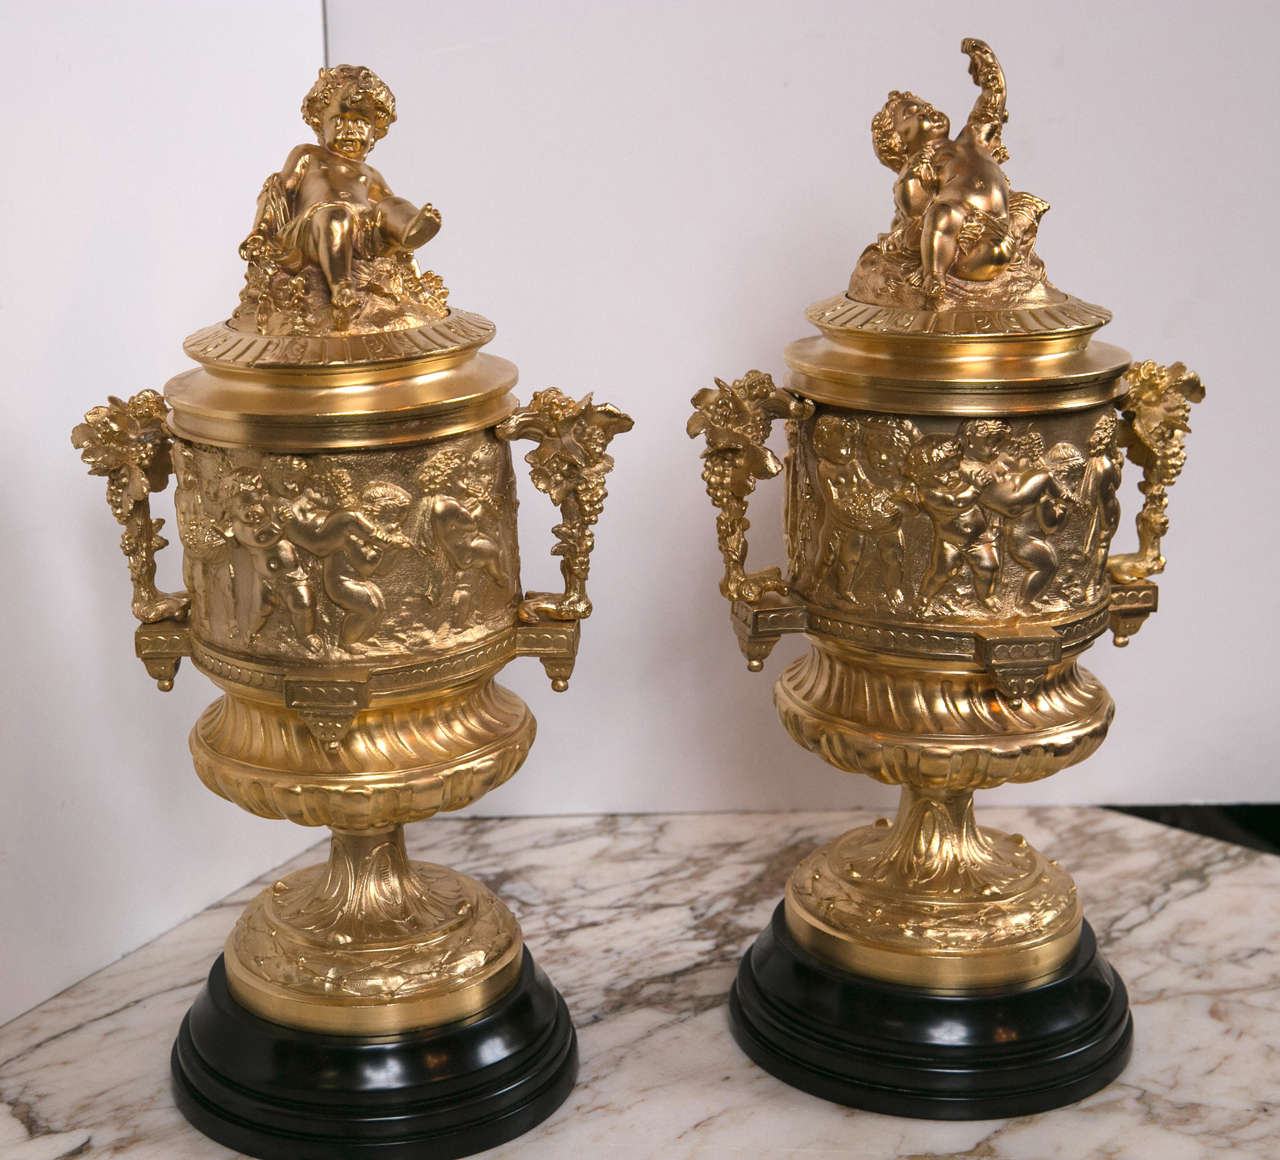 20th Century Pair of Gilt Bronze Covered Urns For Sale